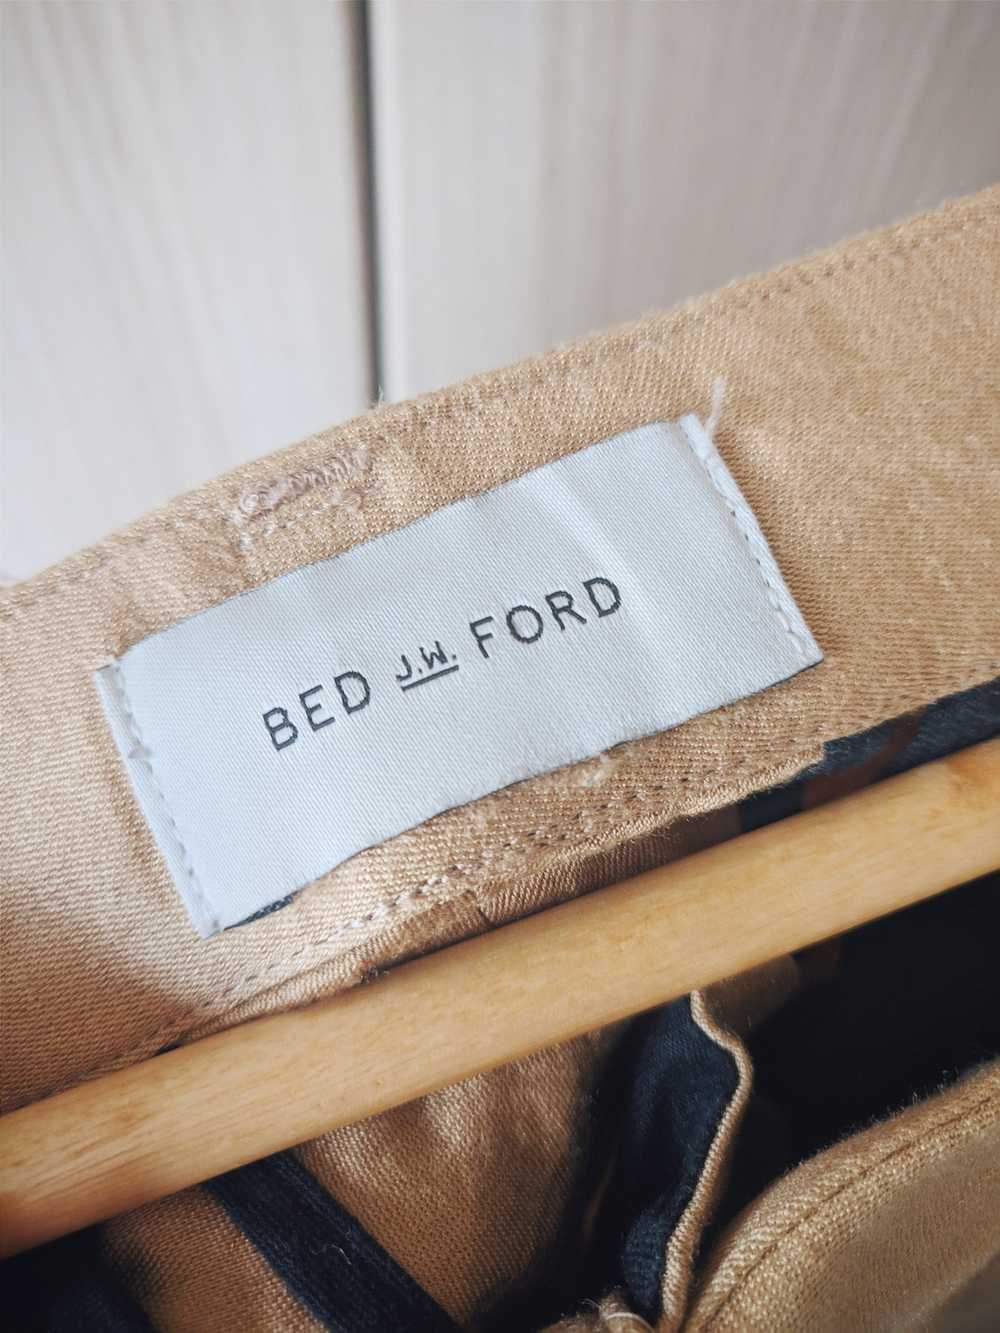 Bed J W Ford SS16 Sailor Trousers - image 4